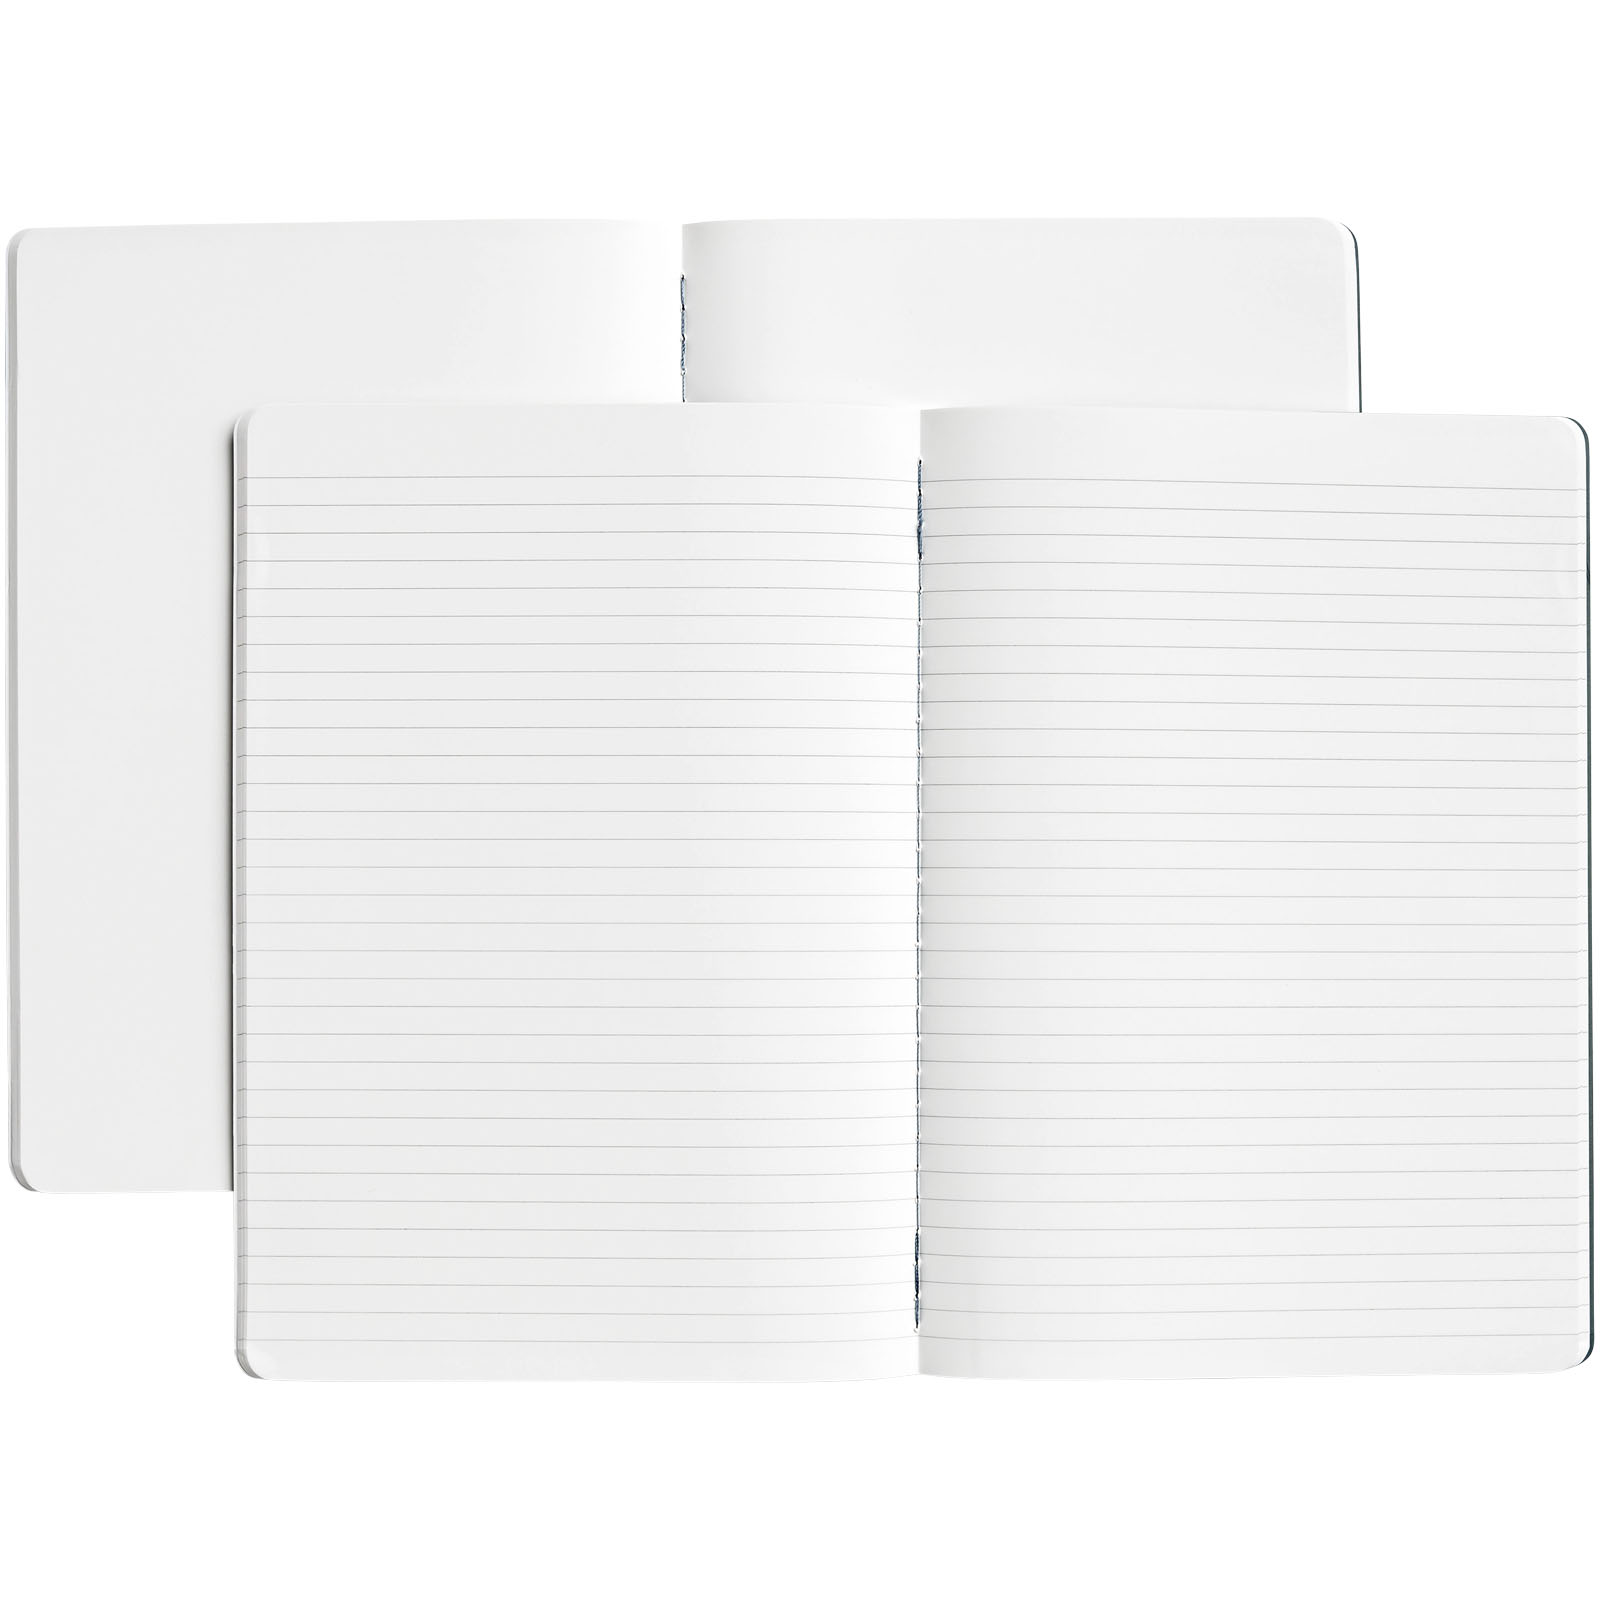 Advertising Hard cover notebooks - Karst® A5 stone paper journal twin pack - 5